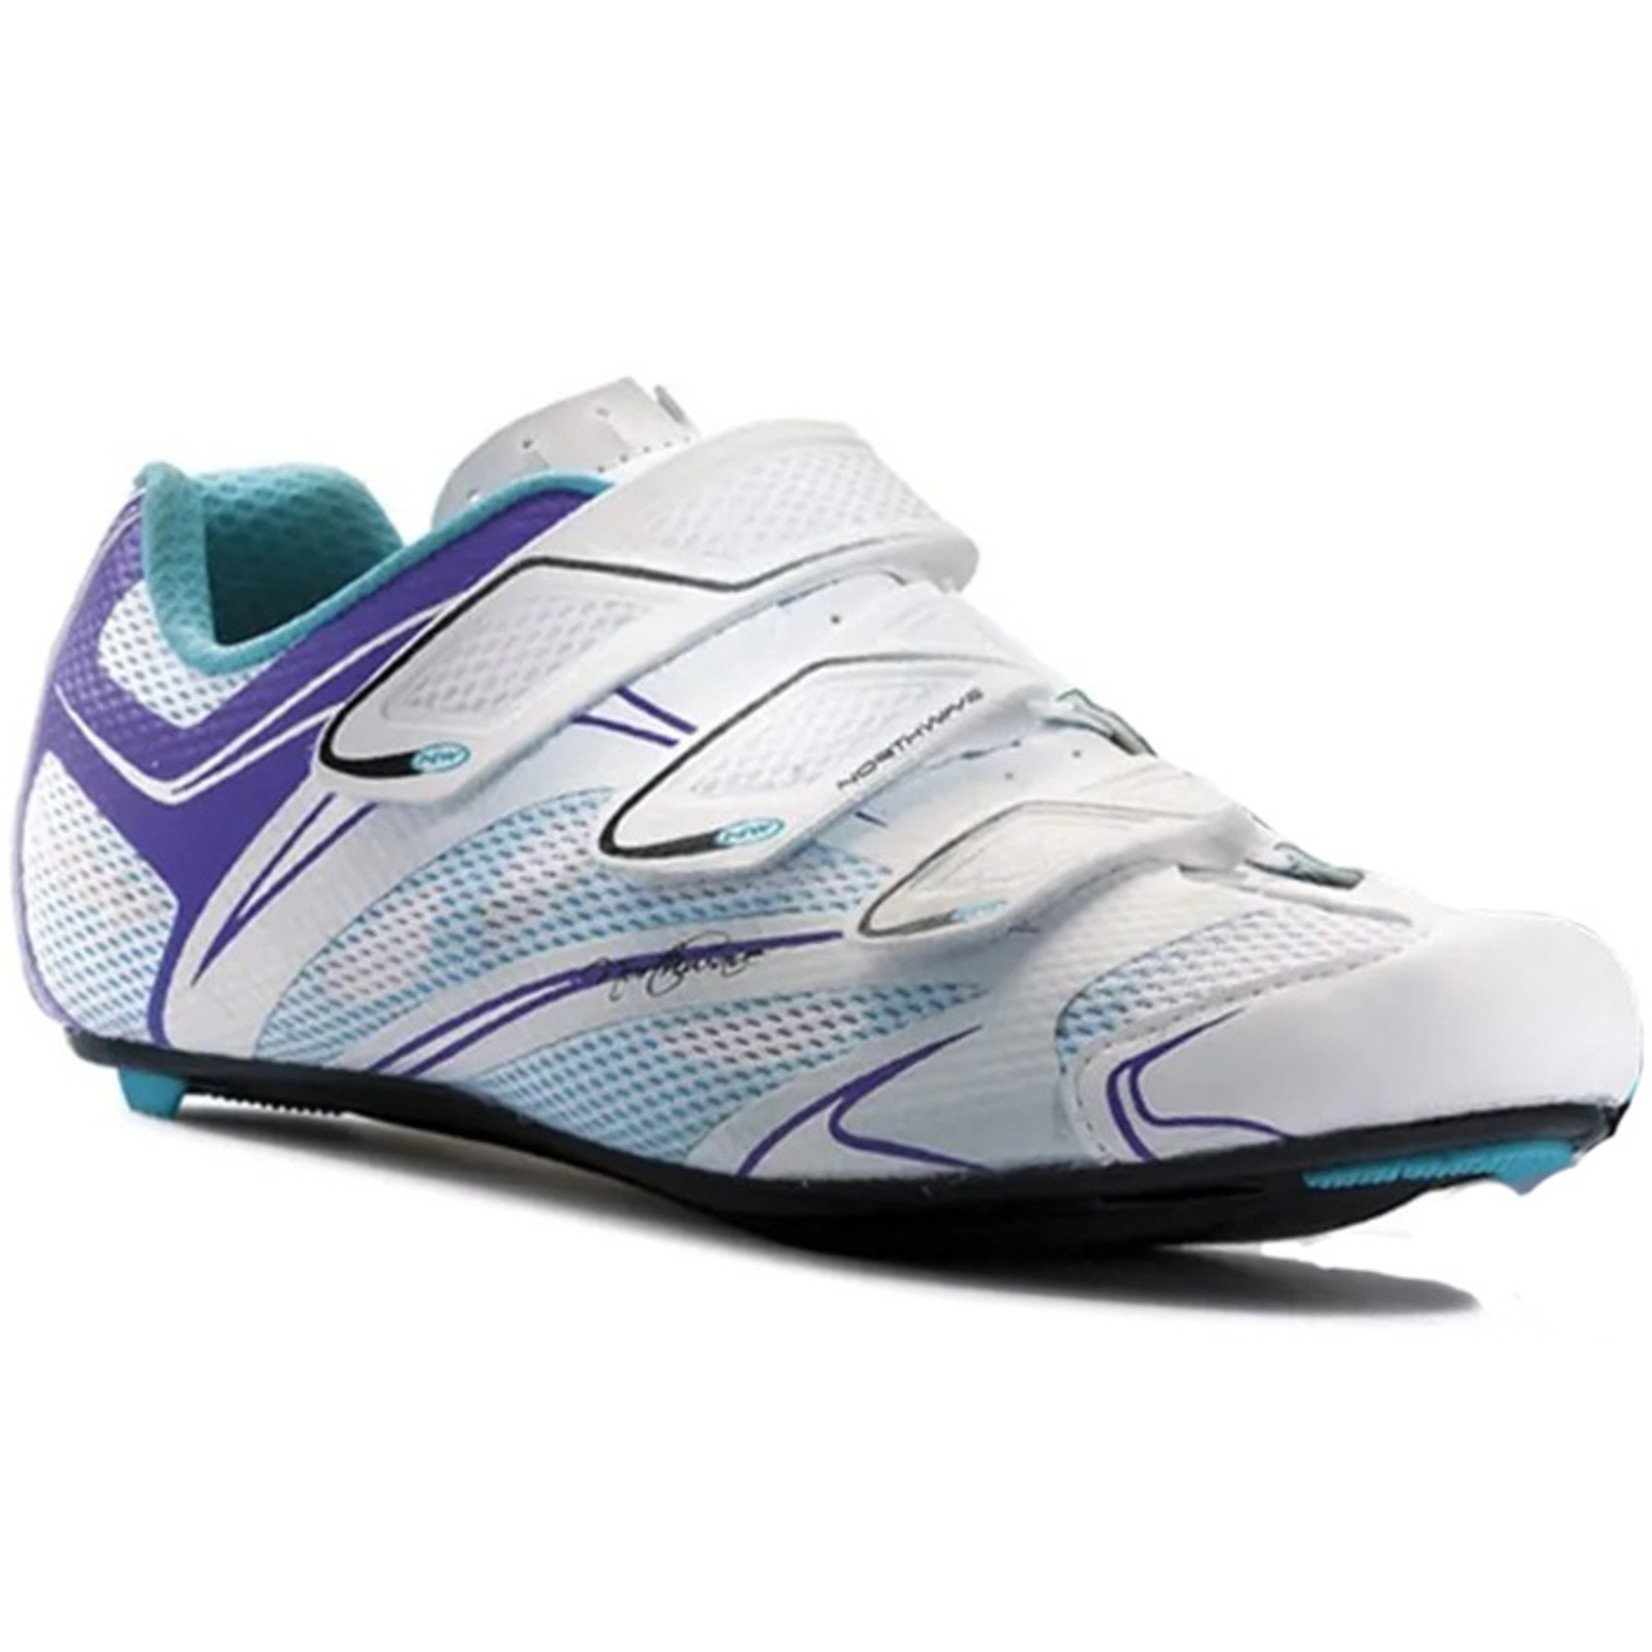 NORTHWAVE Northwave Starlight 3S Road Cycling Shoe